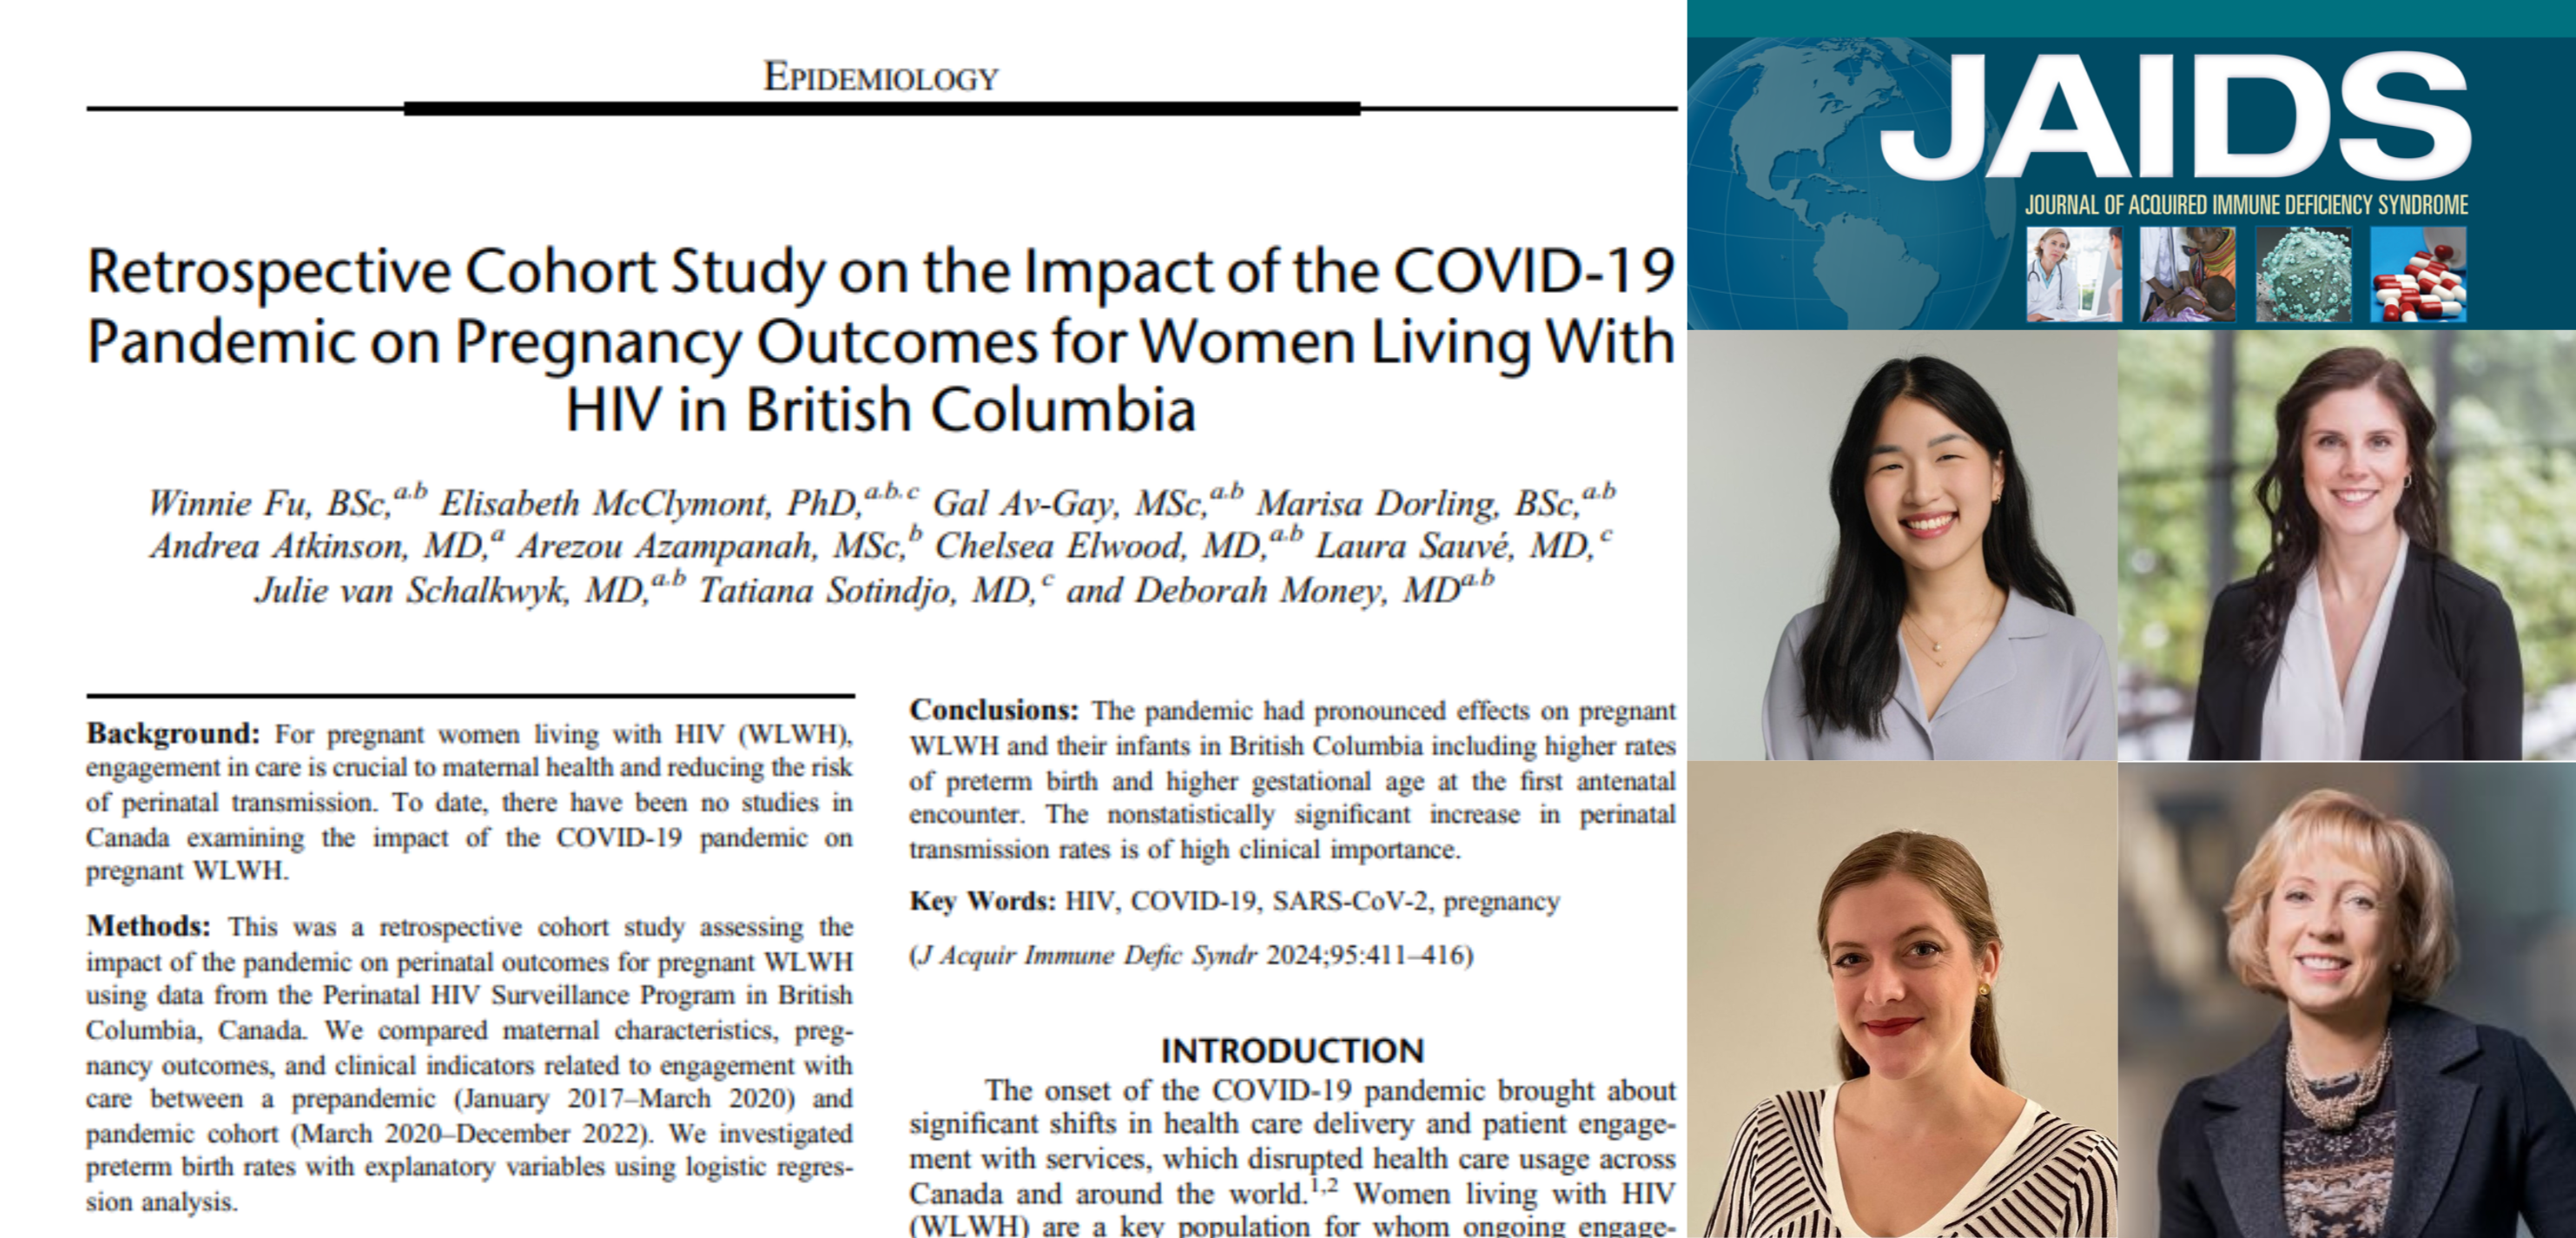 New Publication: “Retrospective Cohort Study on the Impact of the COVID-19 Pandemic on Pregnancy Outcomes for Women Living With HIV in British Columbia” published in JAIDS!